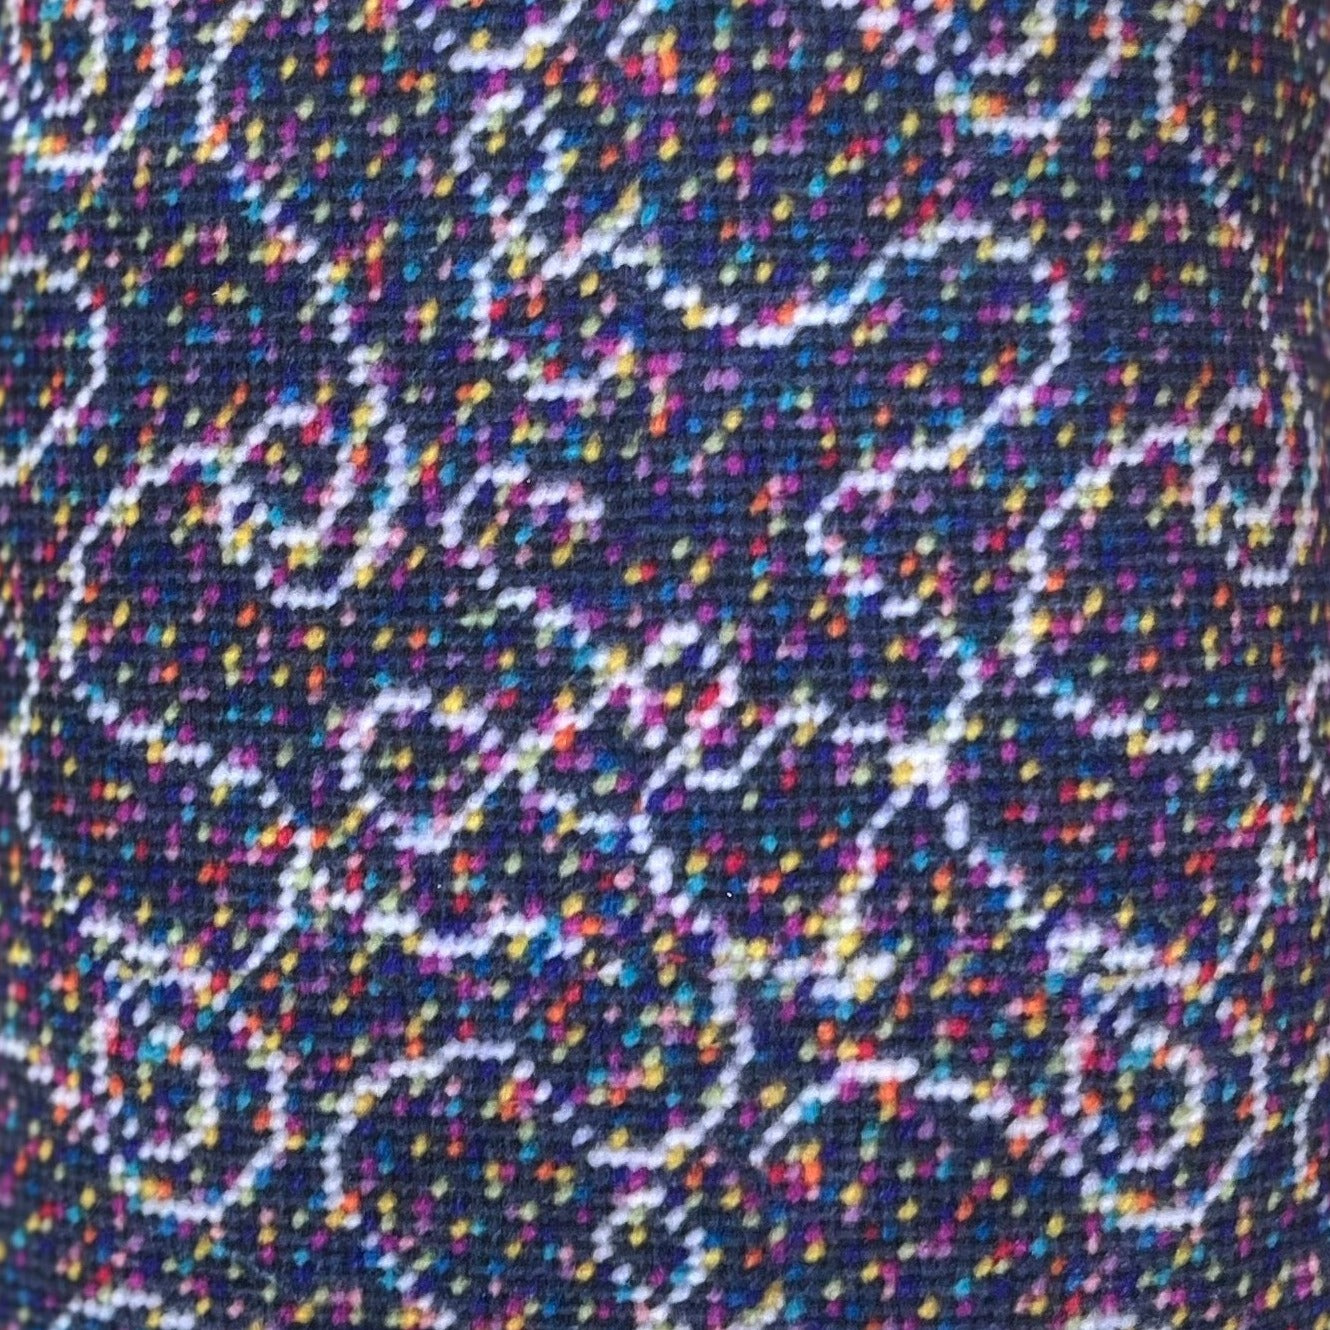 velvet fabric with white swirls on gray background with tiny multi-colored dots